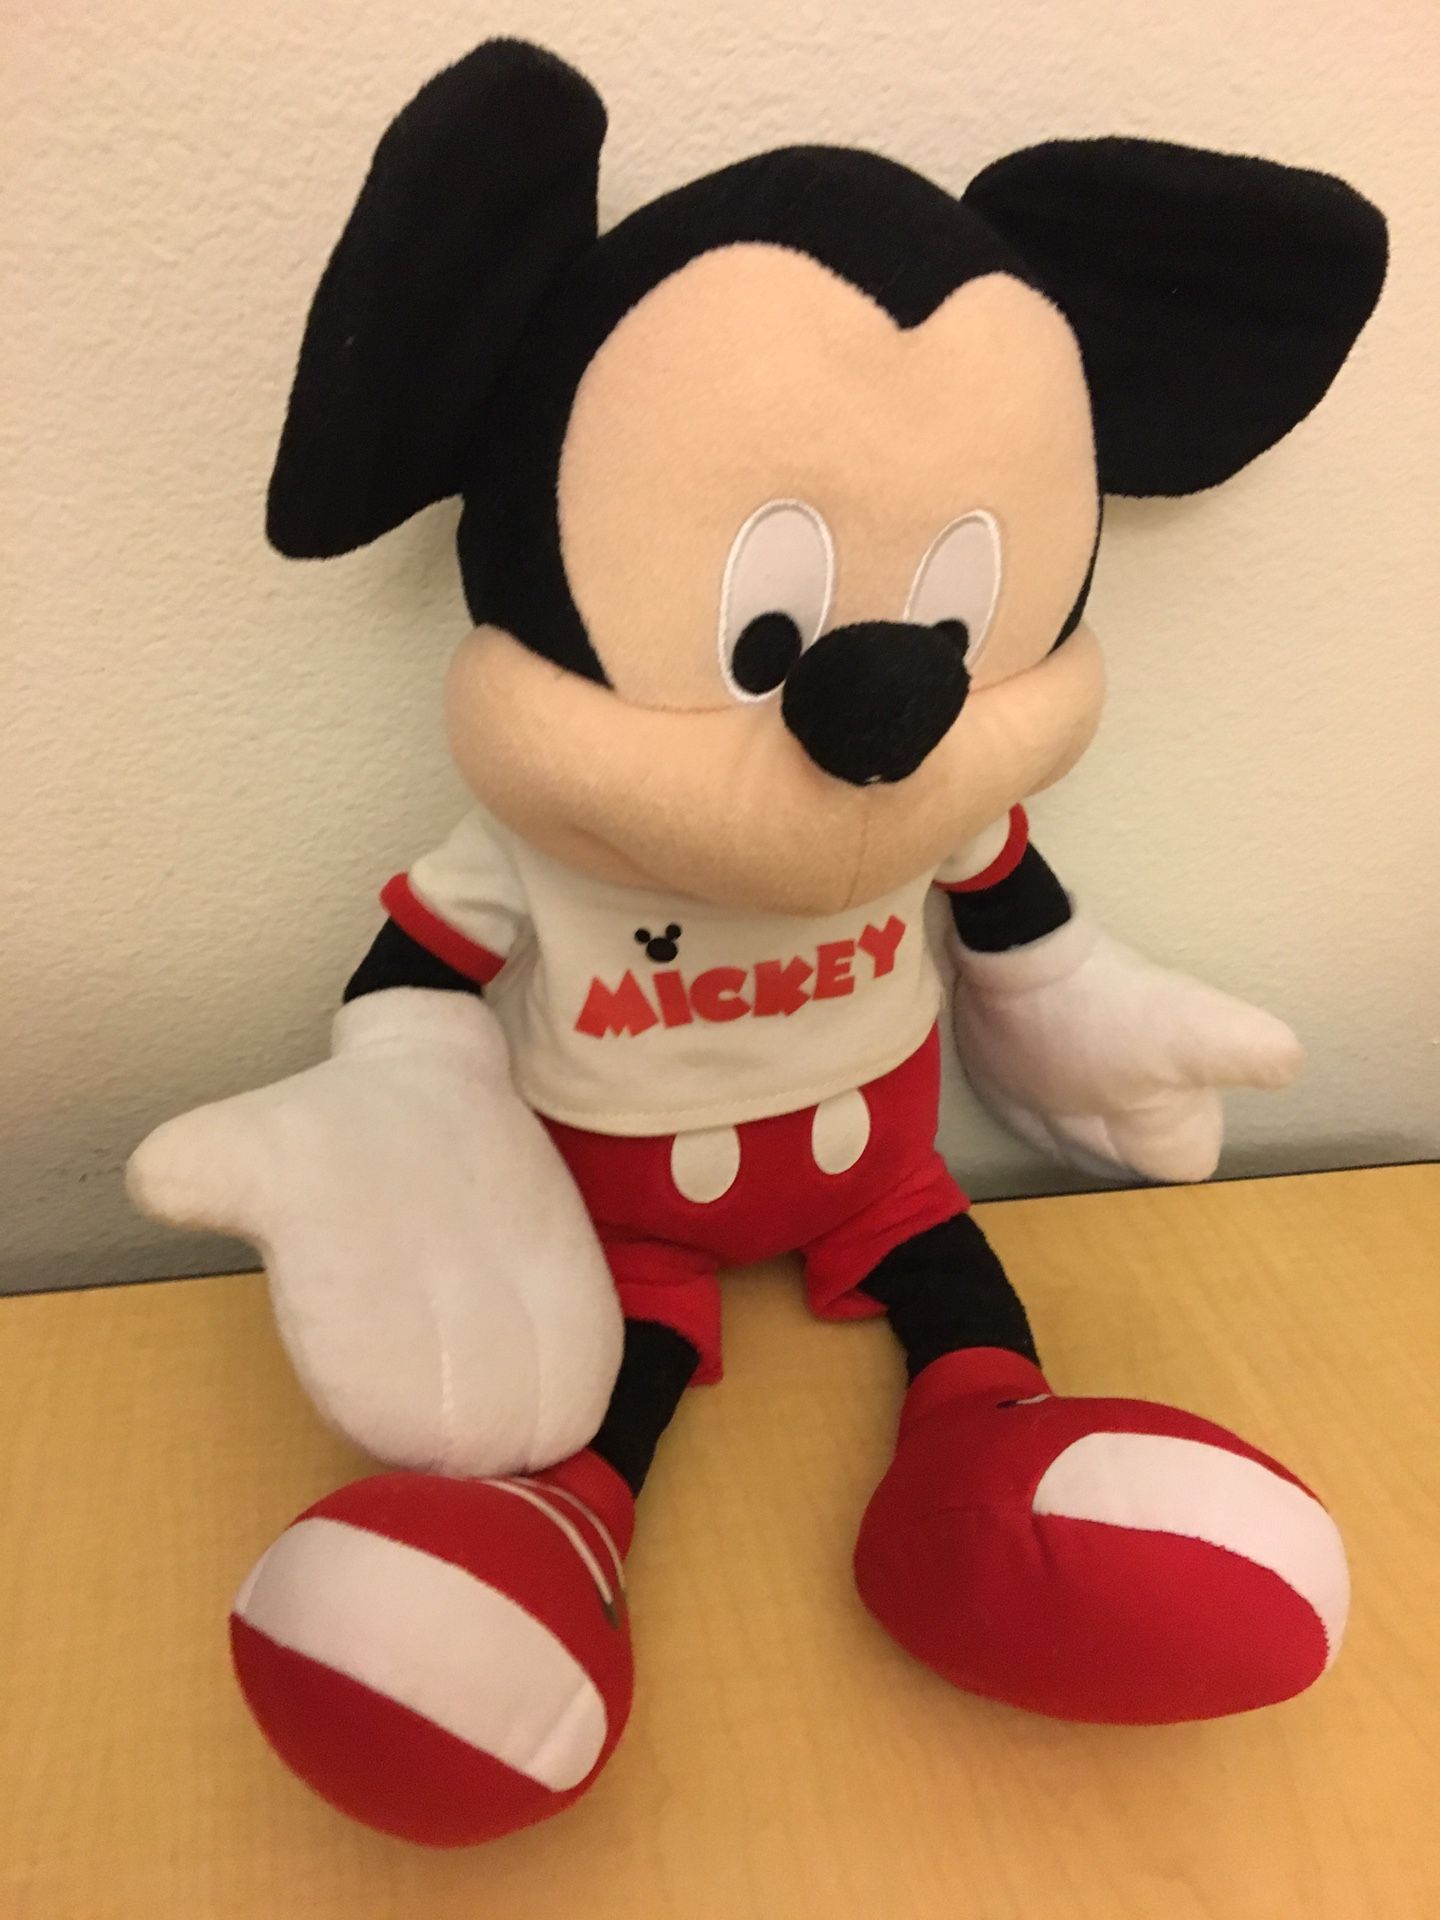 Mickey Mouse and teddy bears plush